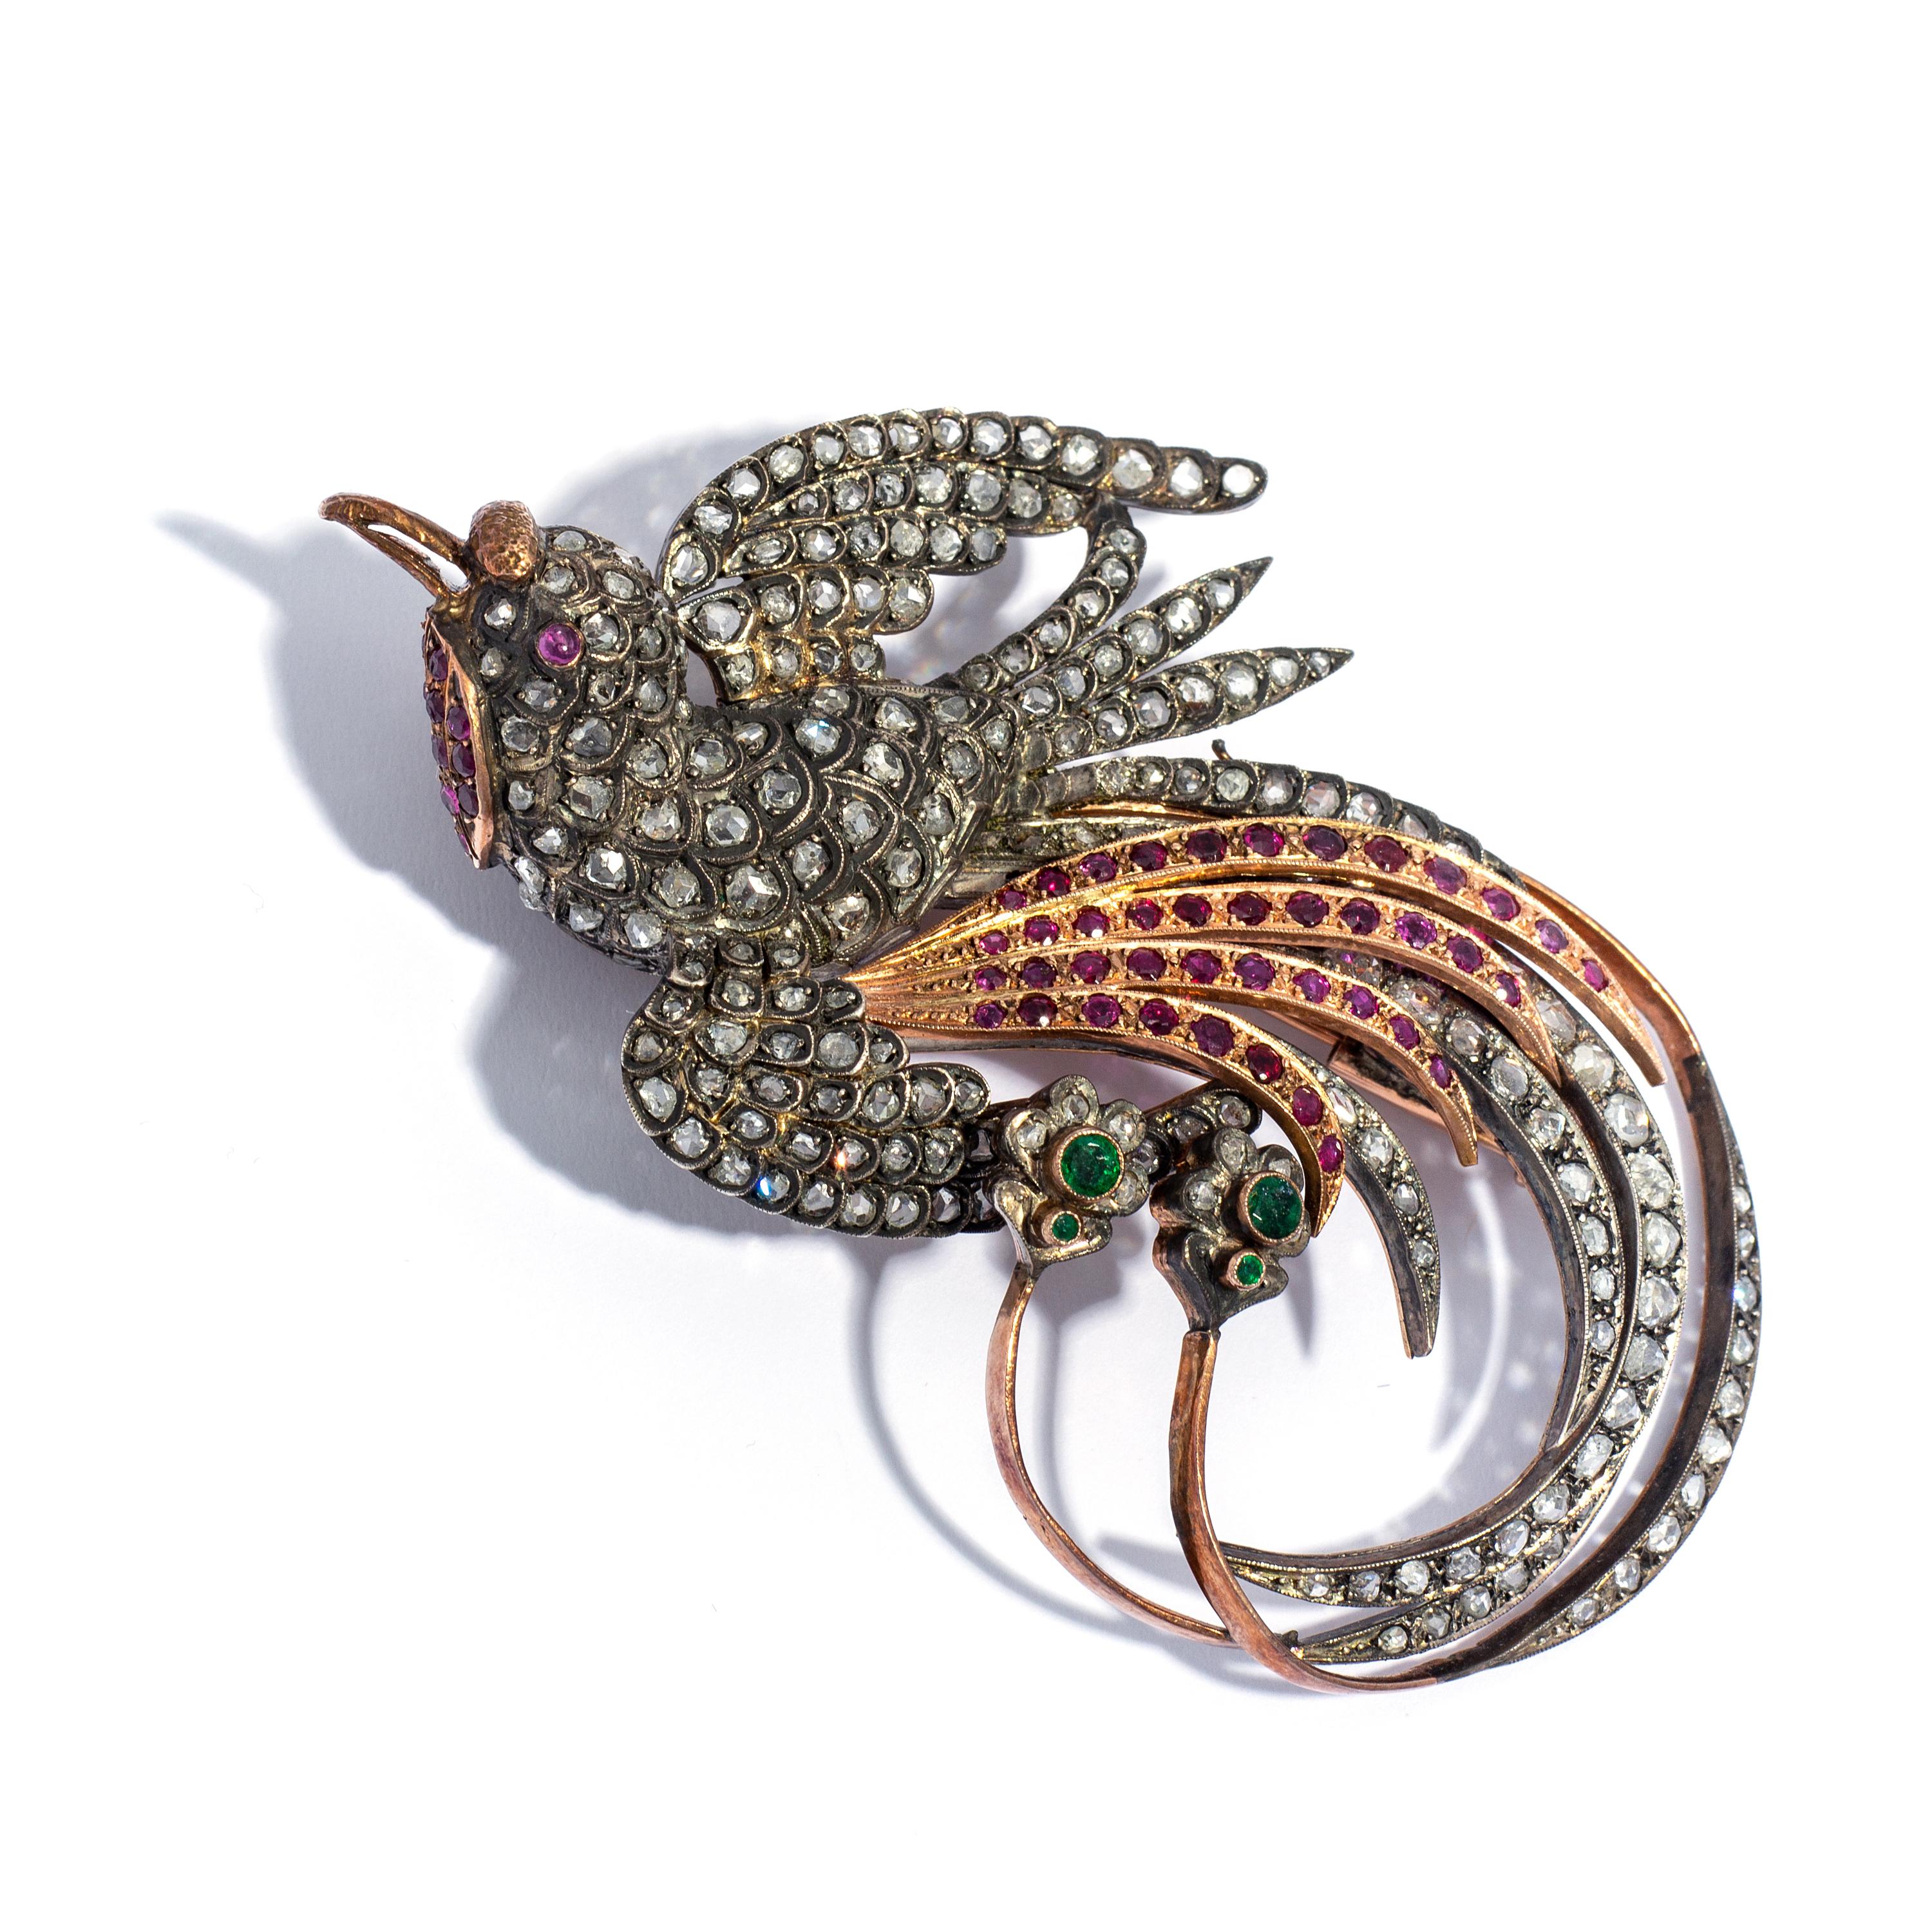 Brooch Paradise Bird Rose cut Diamond, ruby and emerald. Total 10.15 carats on silver and gold. 
Early 20th century.

Length: 3,35 inches (8.5 centimeters)
Width: 2,36 inches (6.00 centimeters)